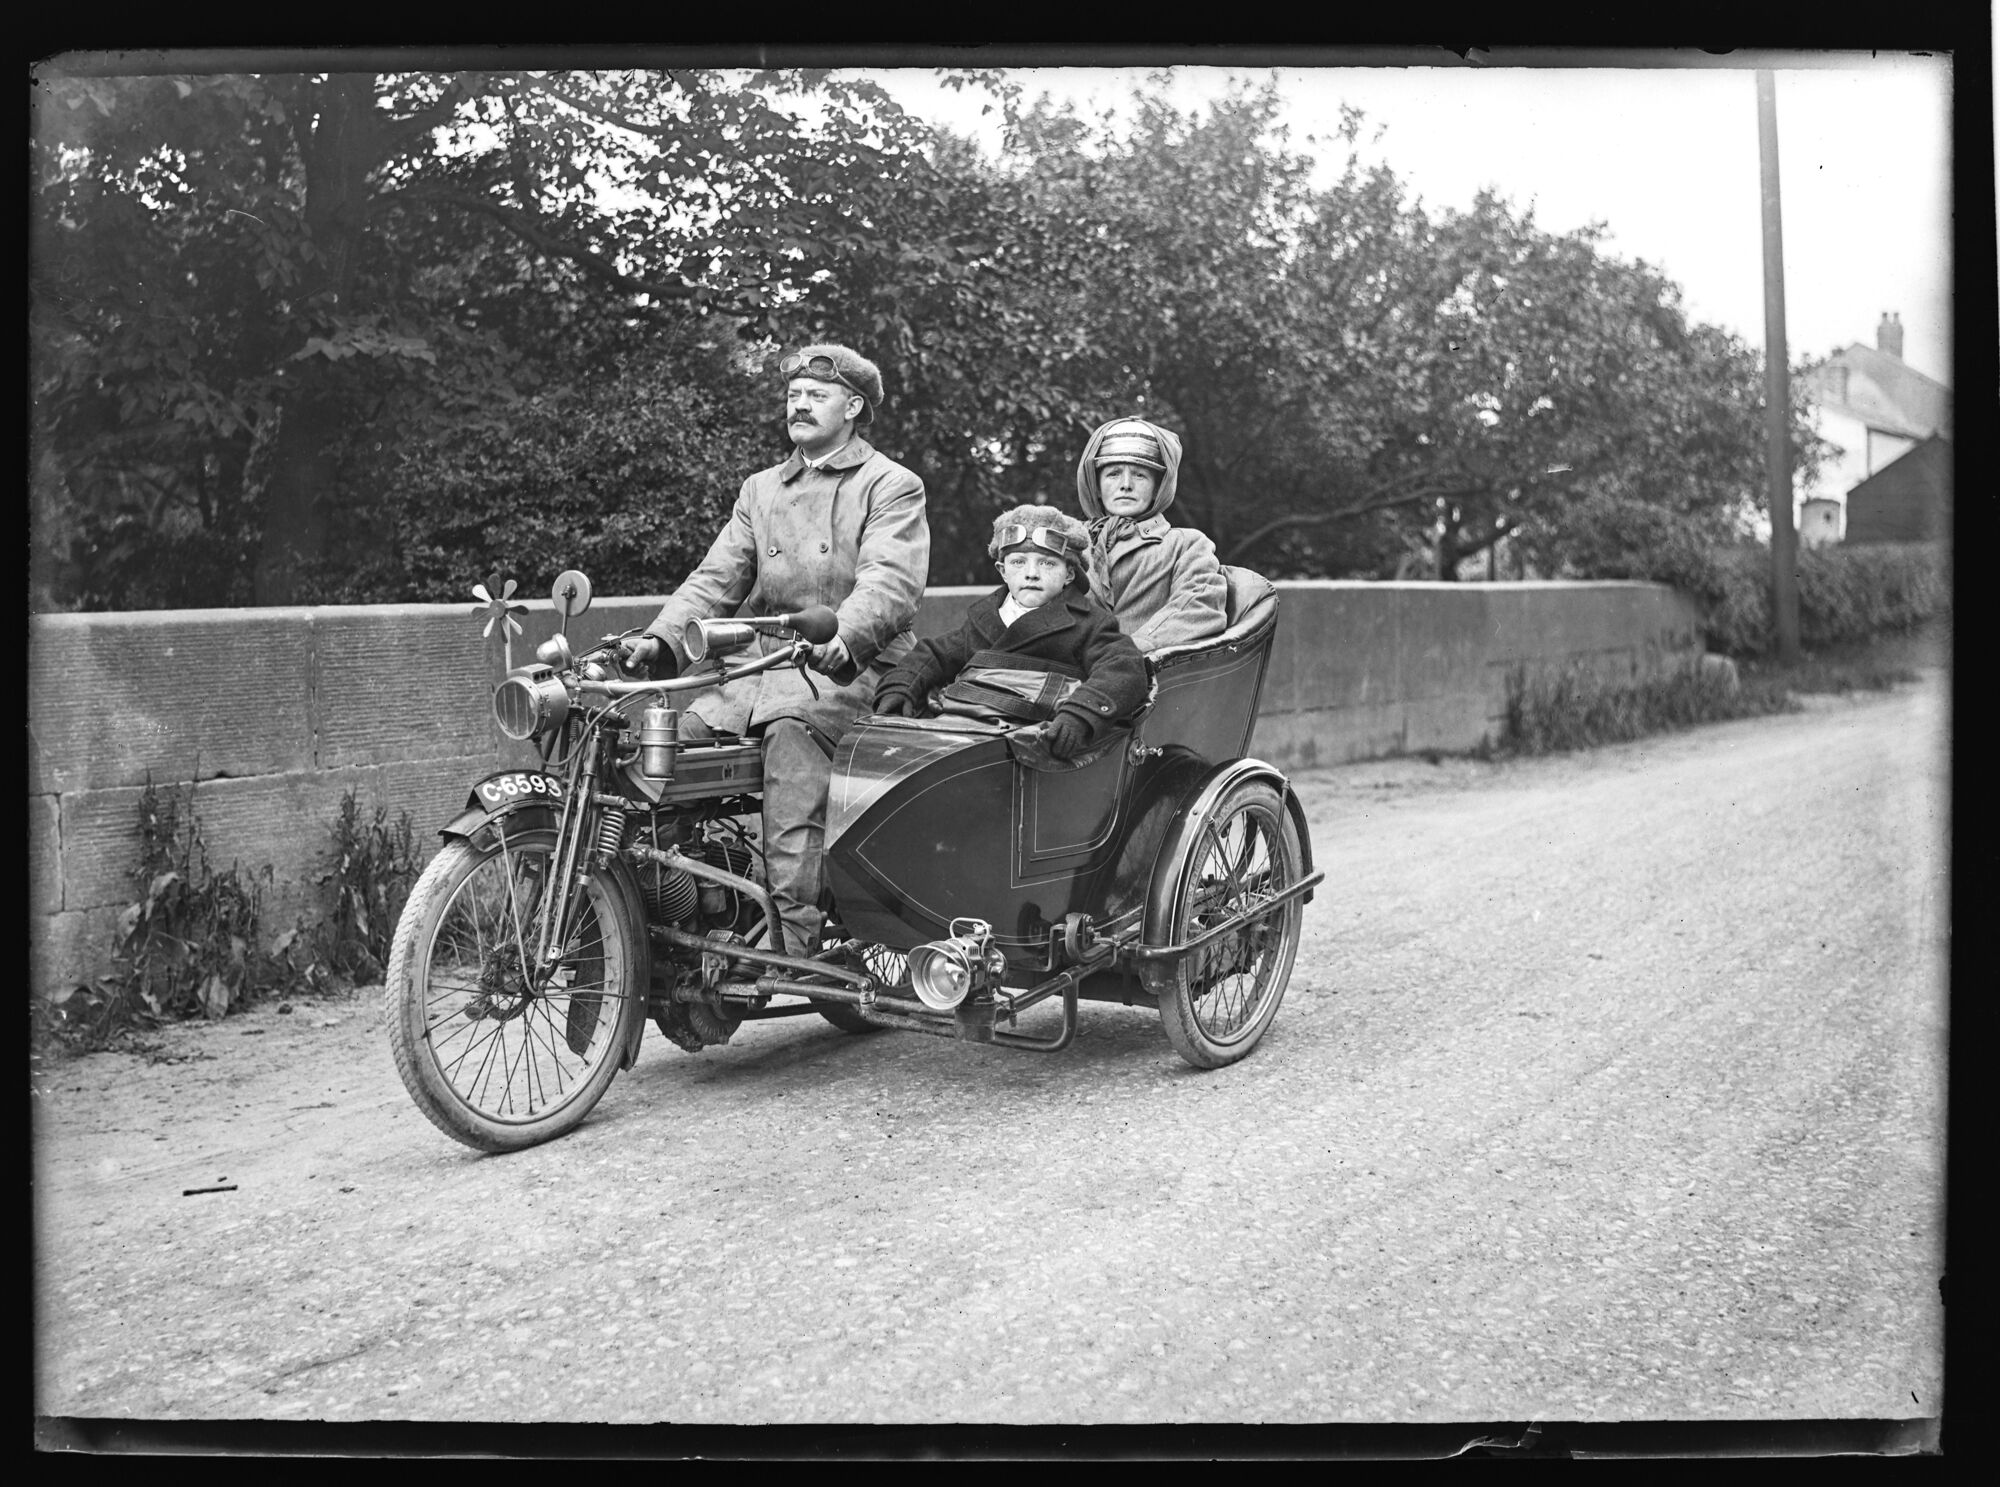 Motorbike & sidecar for two, location unknown